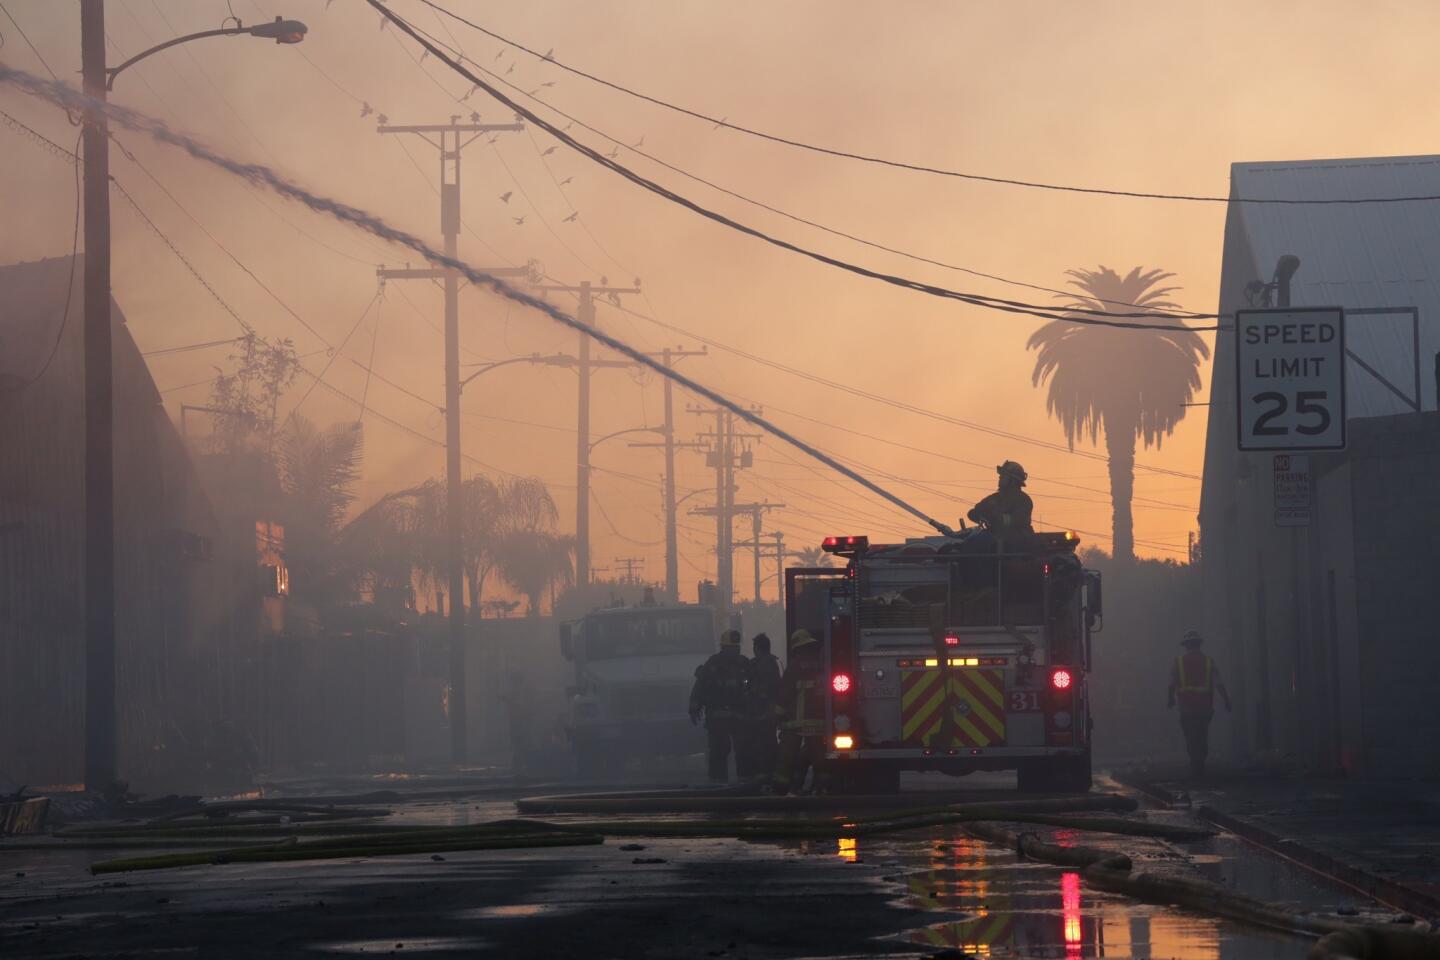 An investigation is underway into the cause of a massive blaze that destroyed businesses in an industrial part of South L.A. early Wednesday.